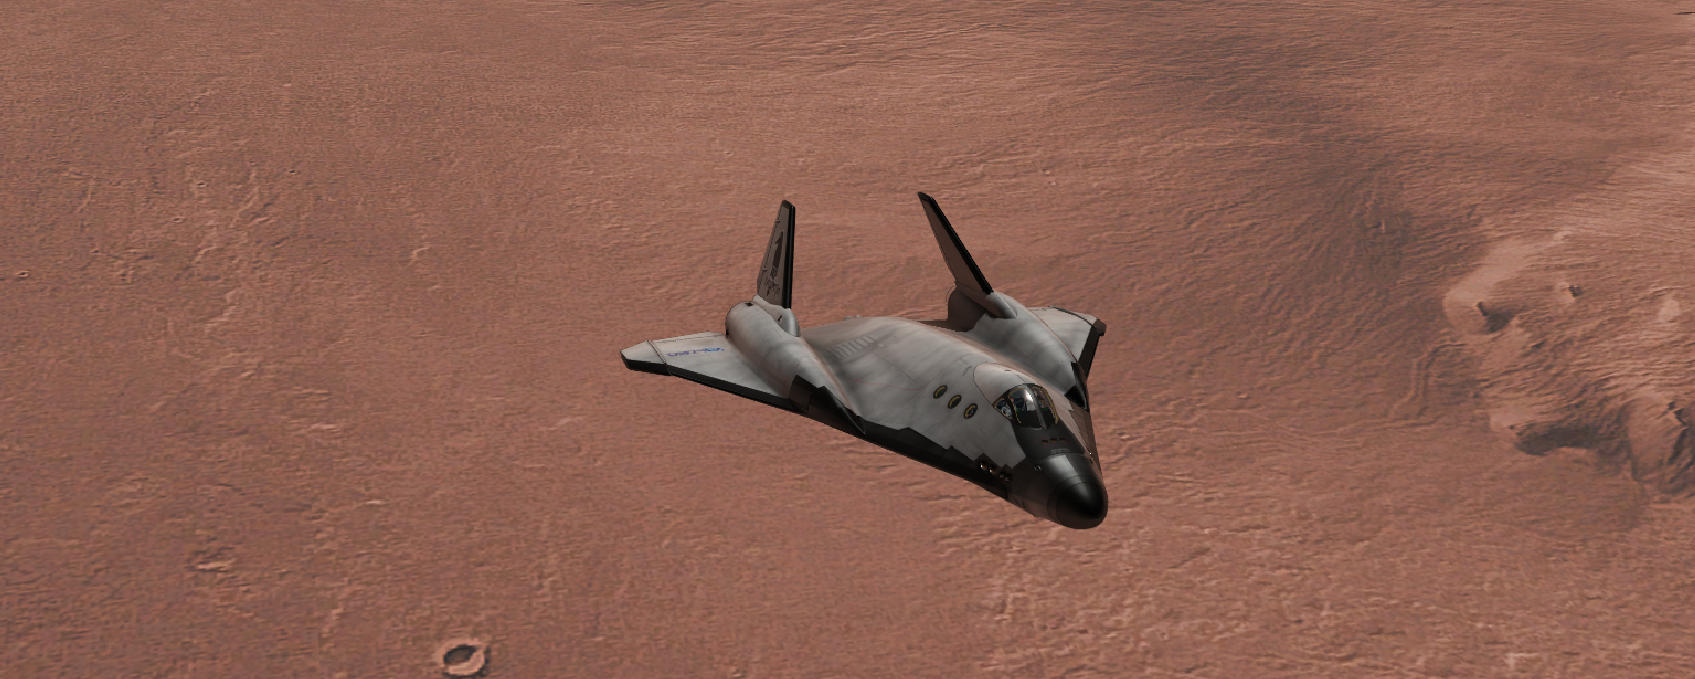 XR2 flying on Mars.png